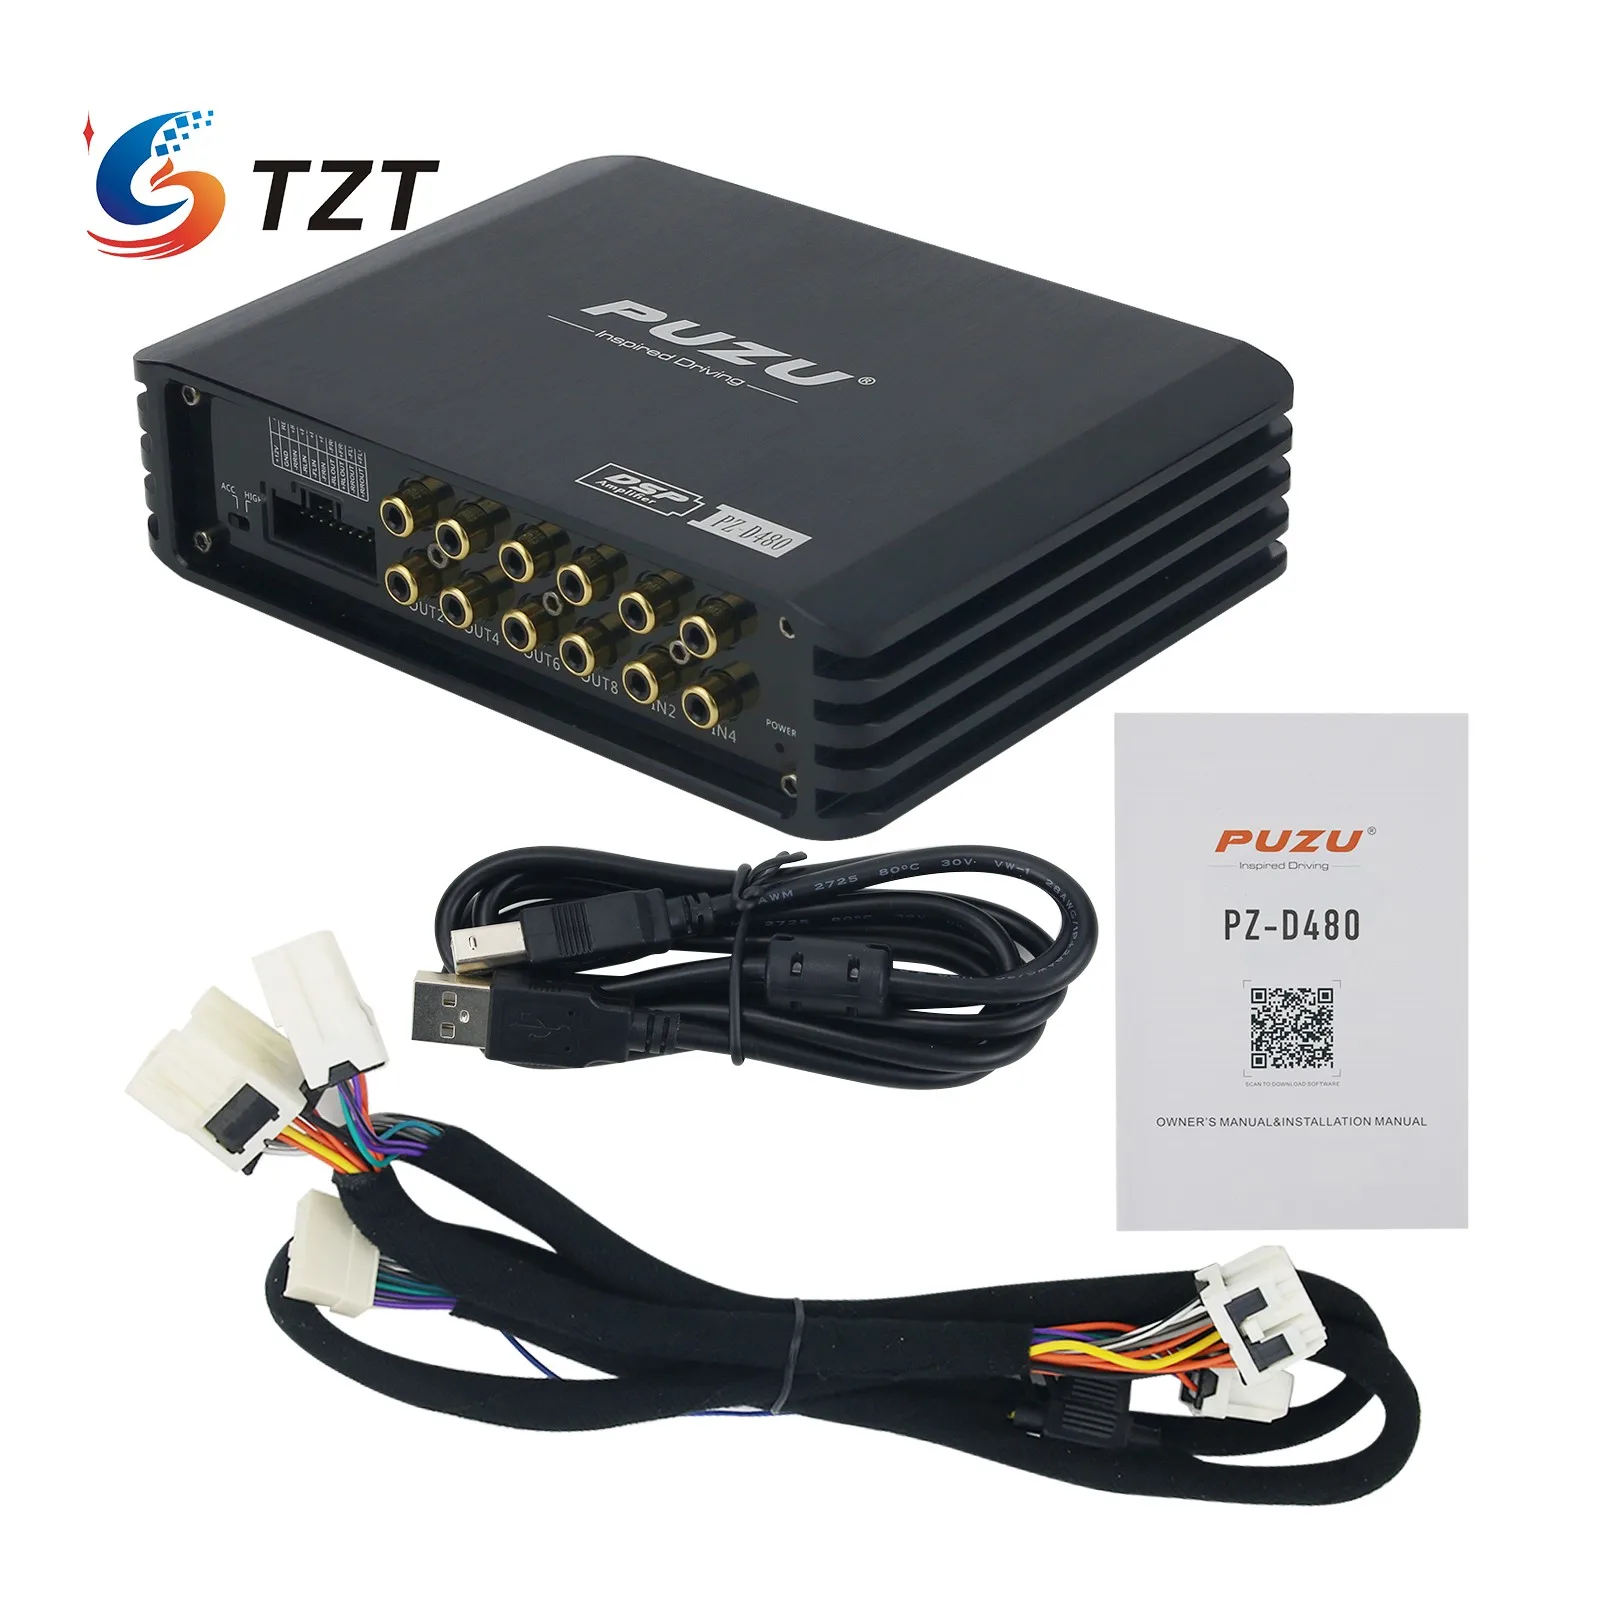 

TZT PUZU PZ-D480 4ch to 8ch car DSP amplifier wiring harness plug and play with 4X180W max output power multi-language support